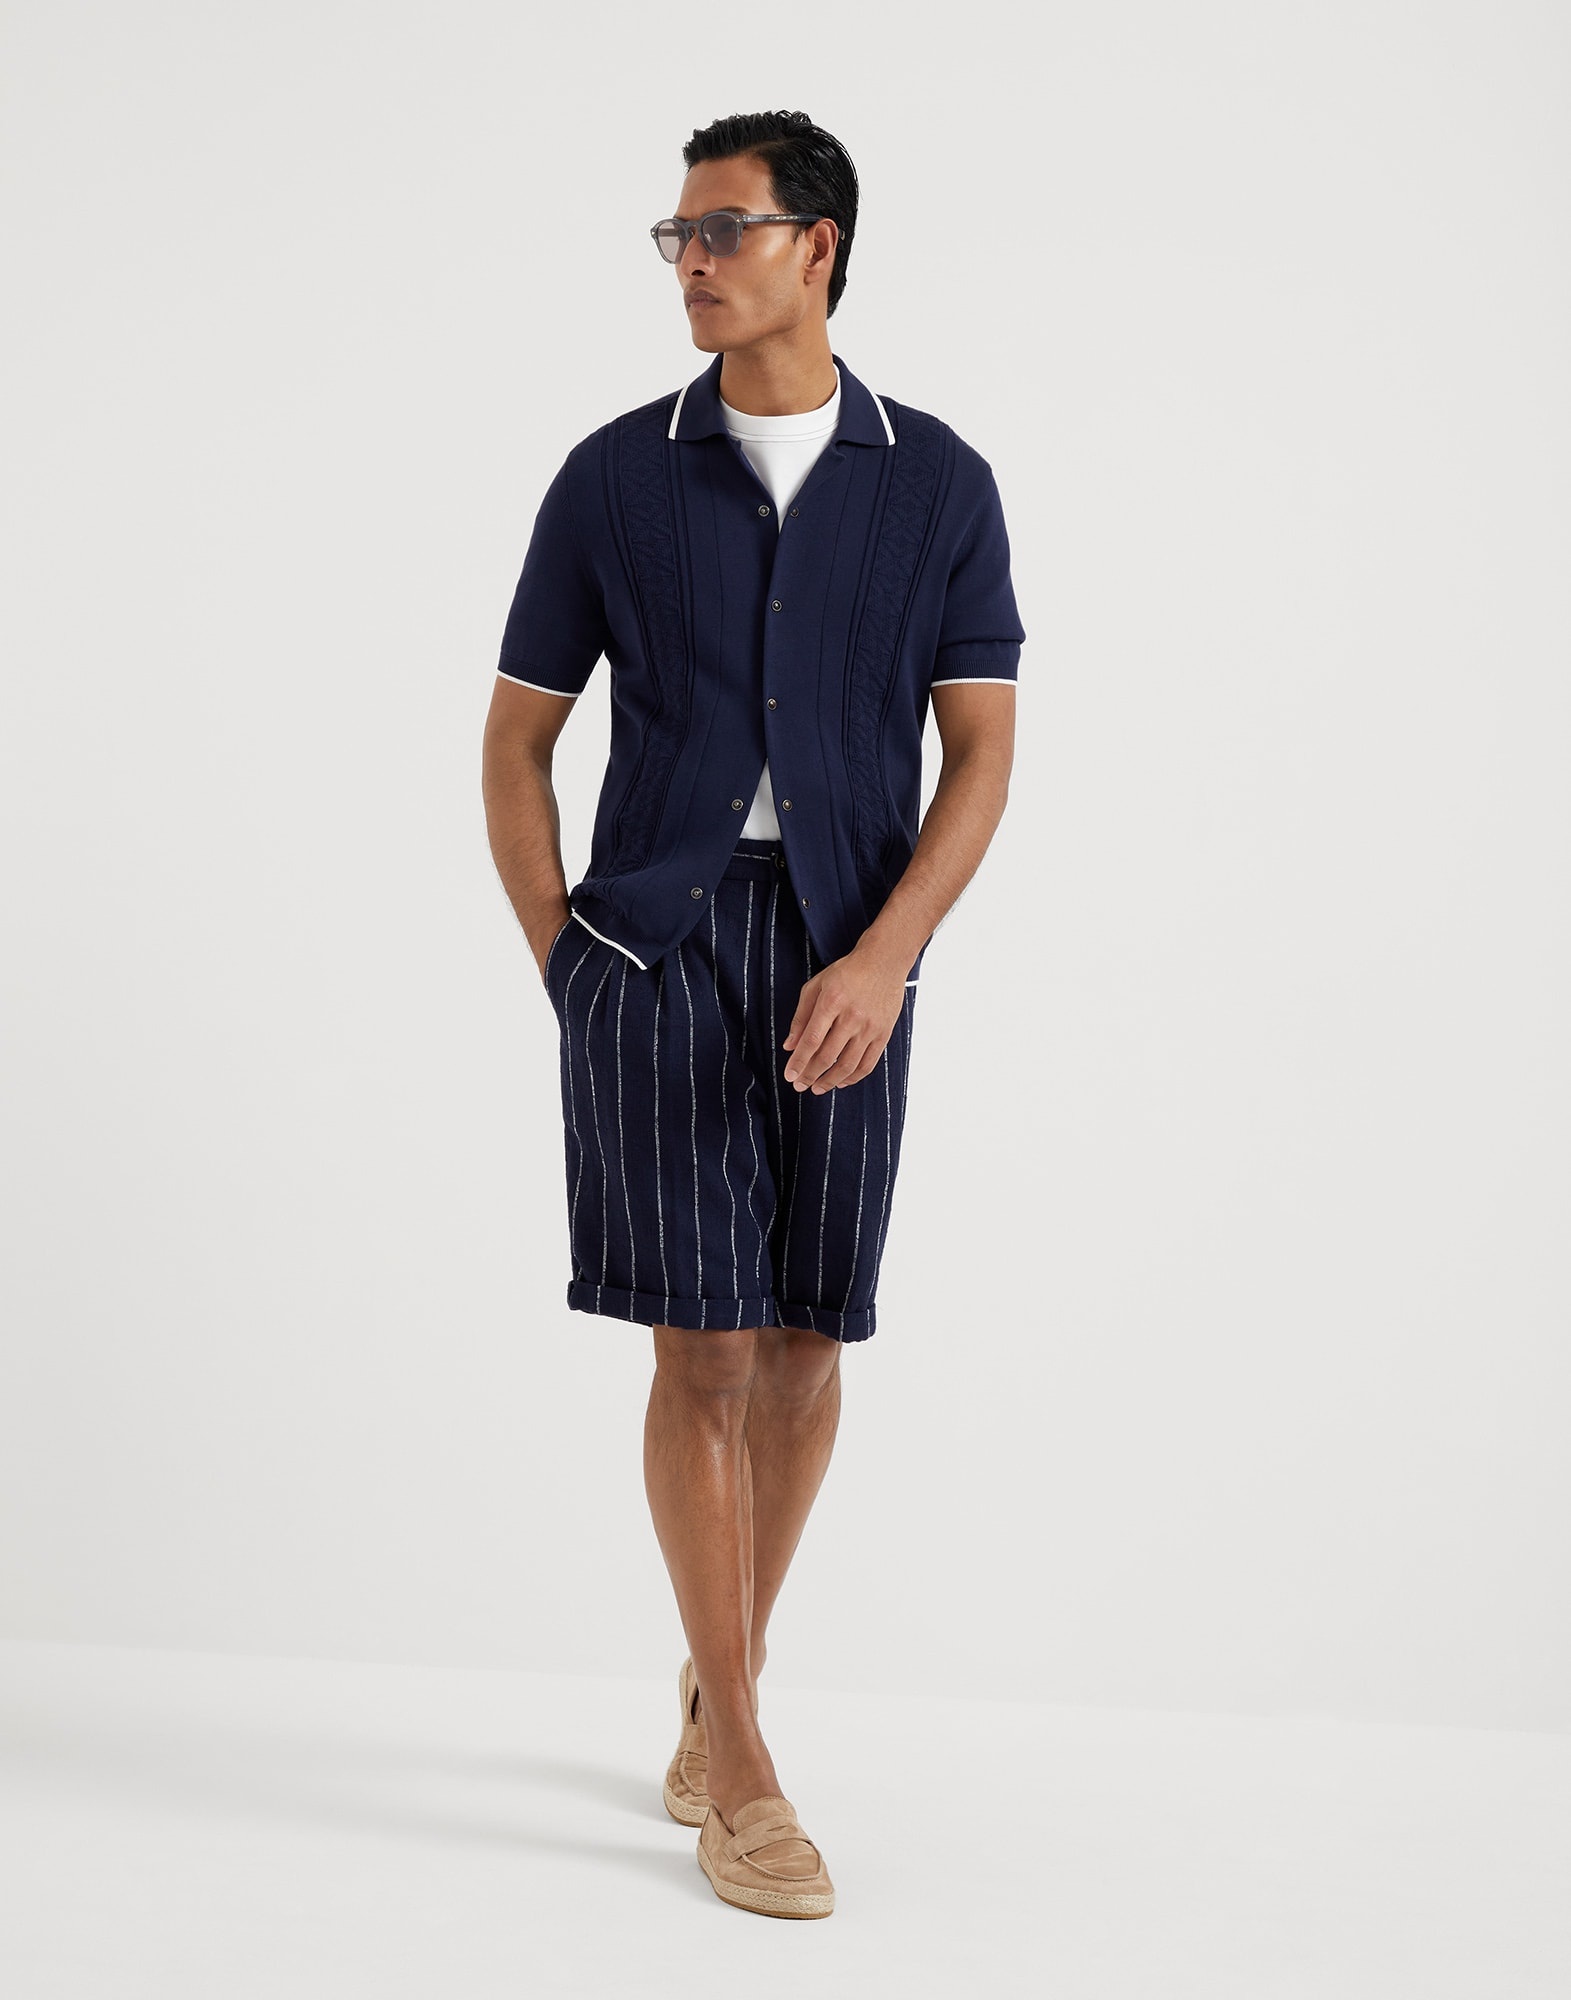 Linen, wool and silk chalk stripe Bermuda shorts with drawstring and double pleats - 4